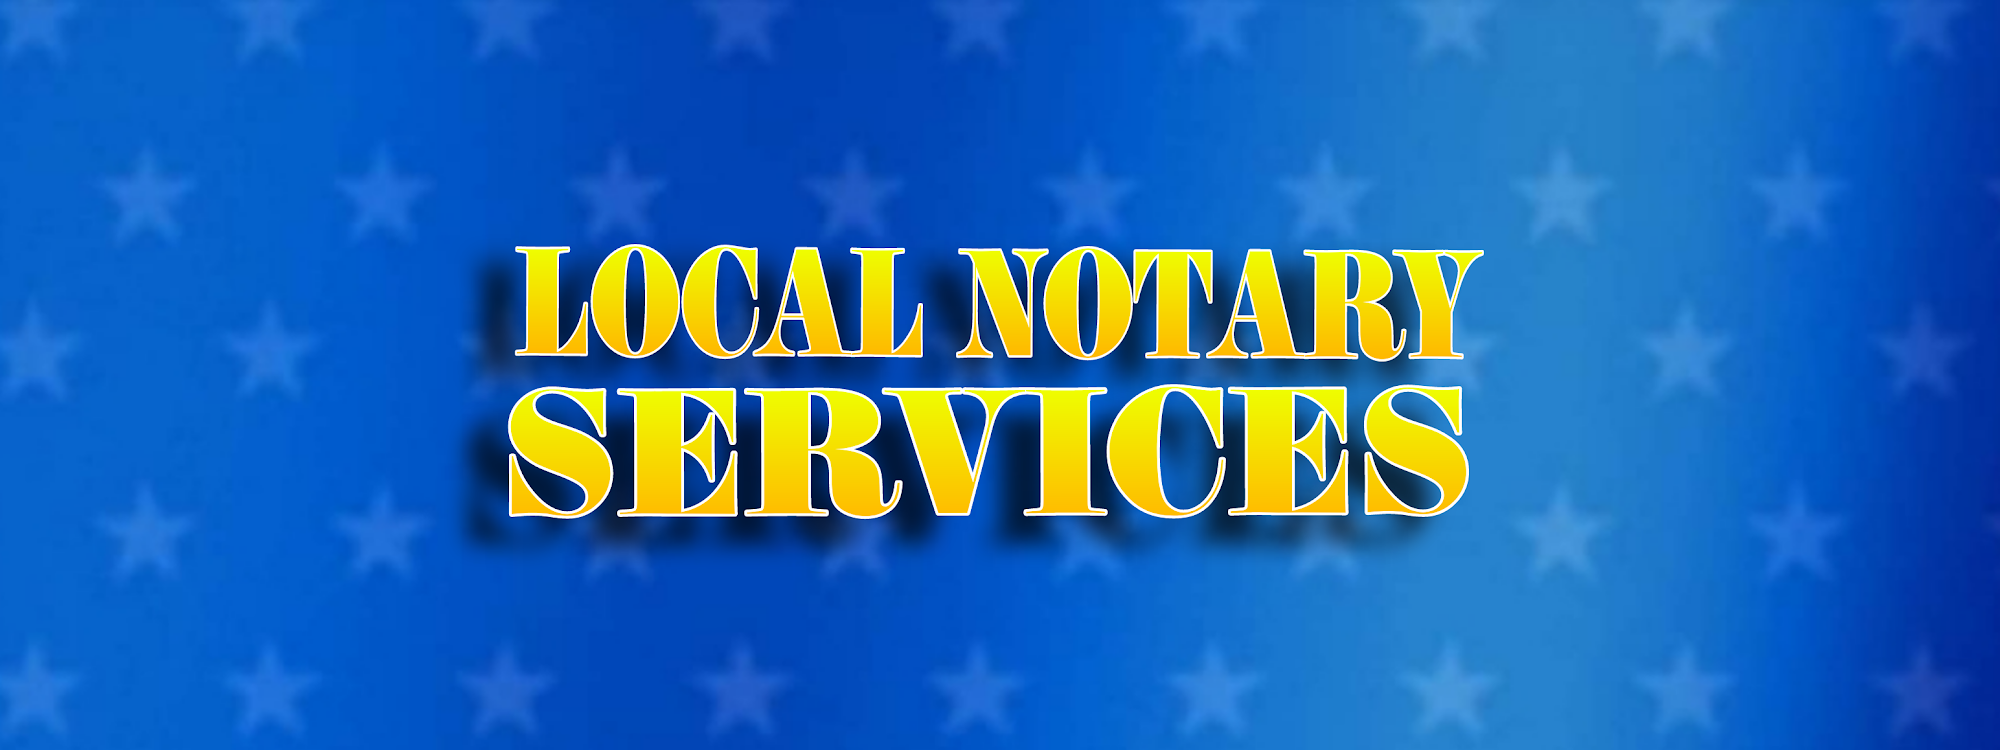 Local Notary Services 210 W 9th St, Chandler Oklahoma 74834